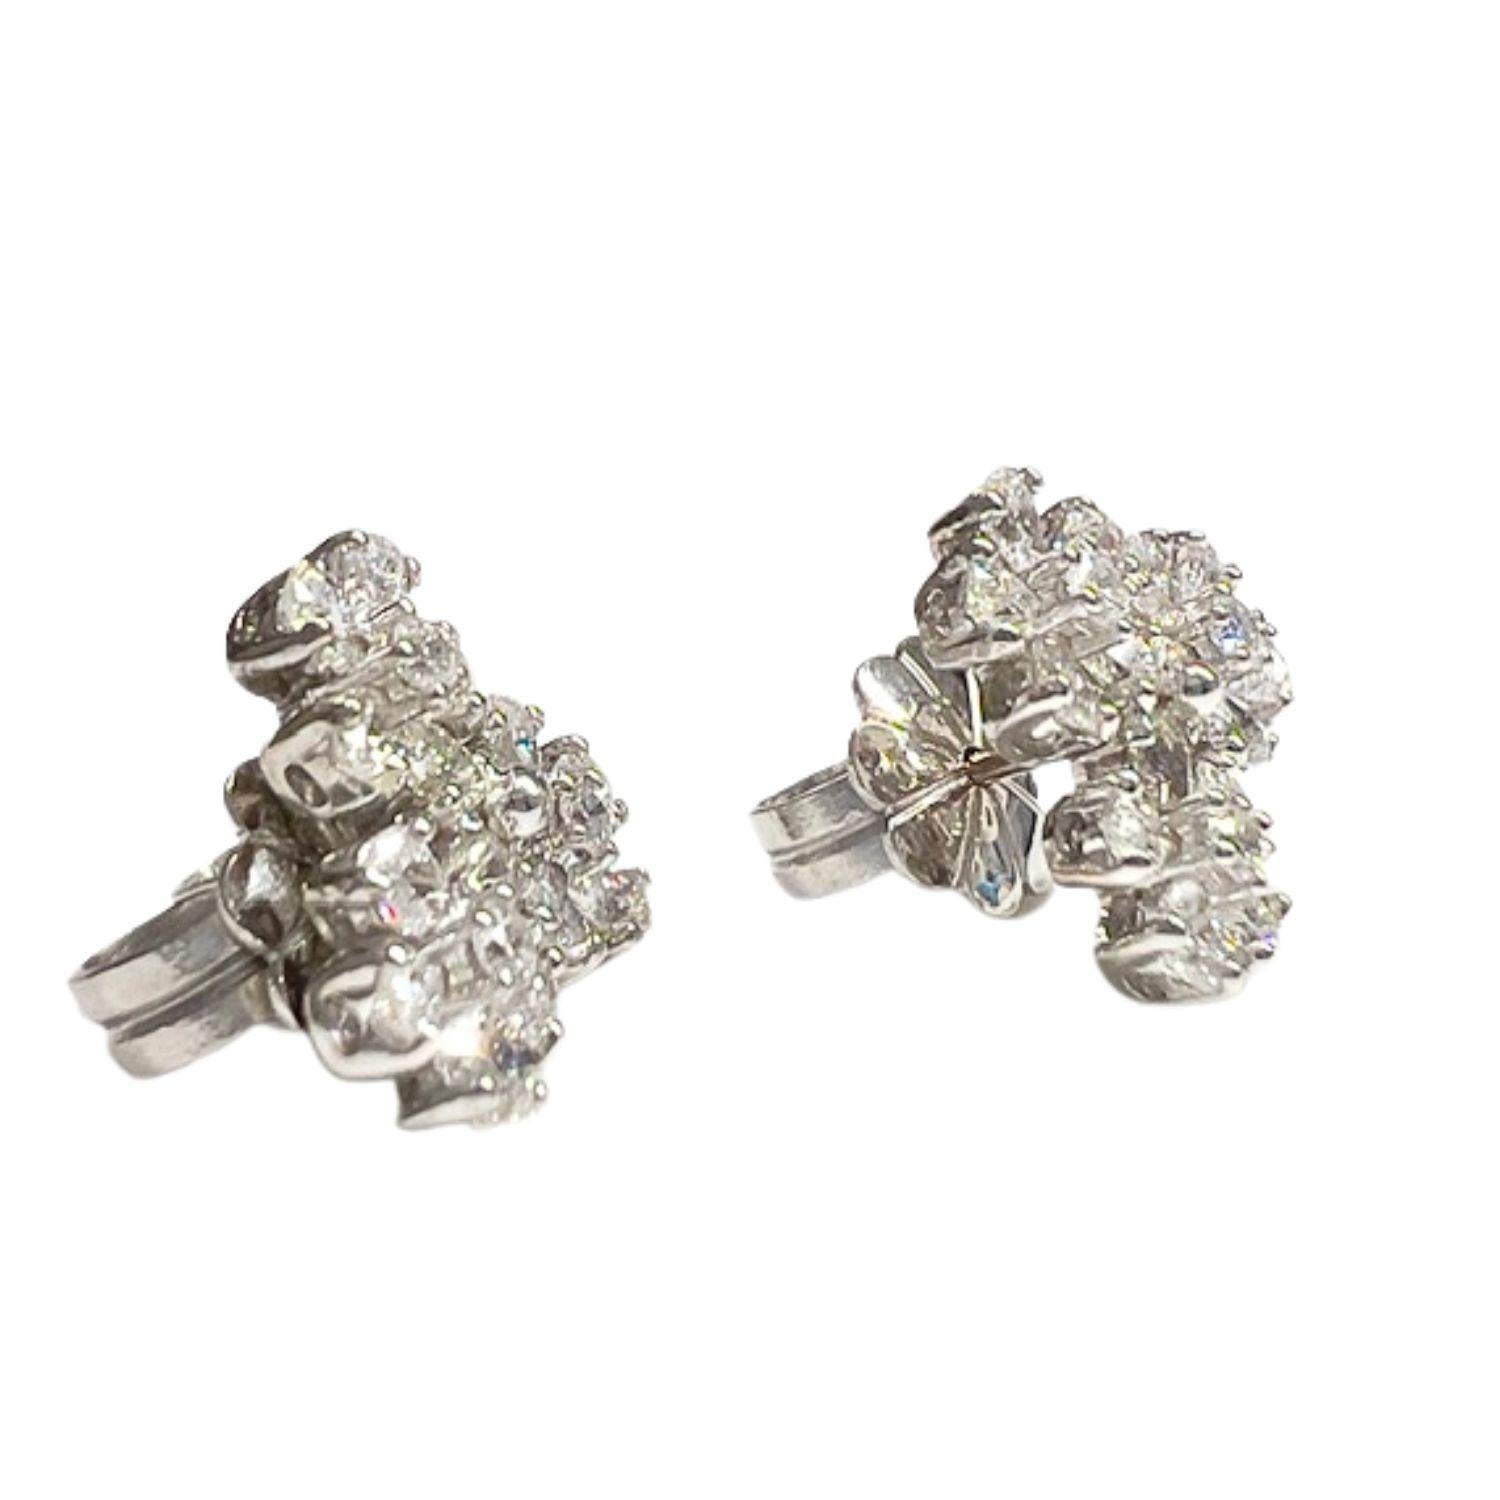 Modern earrings from the 20th century, crafted in 18k white gold and adorned with diamonds. With a weight of 3.1 grams and a size of 1 cm x 1 cm, these earrings exude contemporary elegance. The brilliant-cut and single-cut diamonds weigh a total of